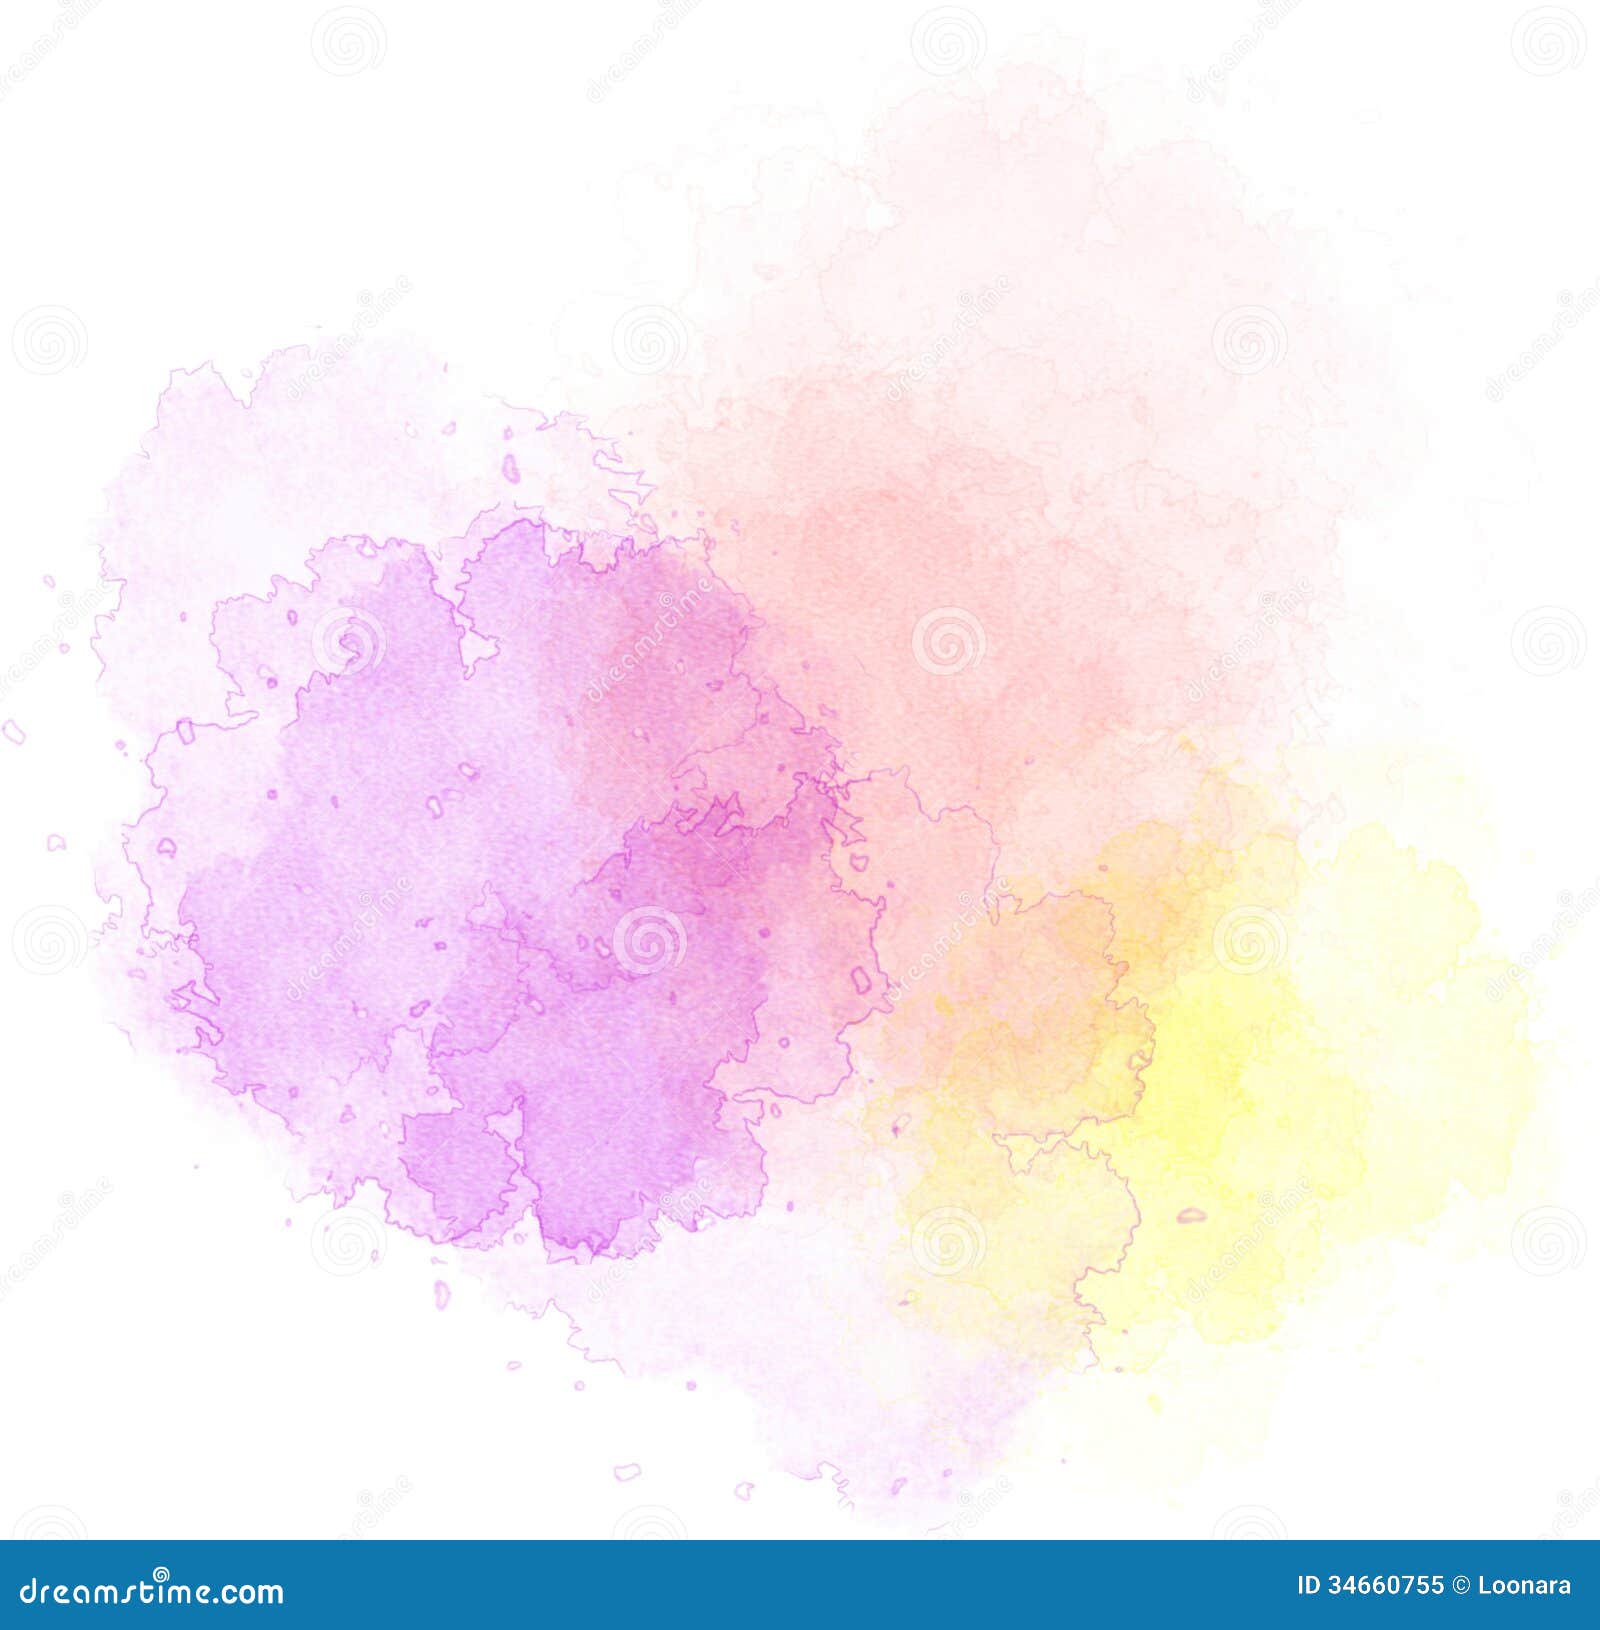 Spots Of Watercolor Royalty Free Stock Photo - Image: 34660755 Small Bright Spot On An Object Or Painting